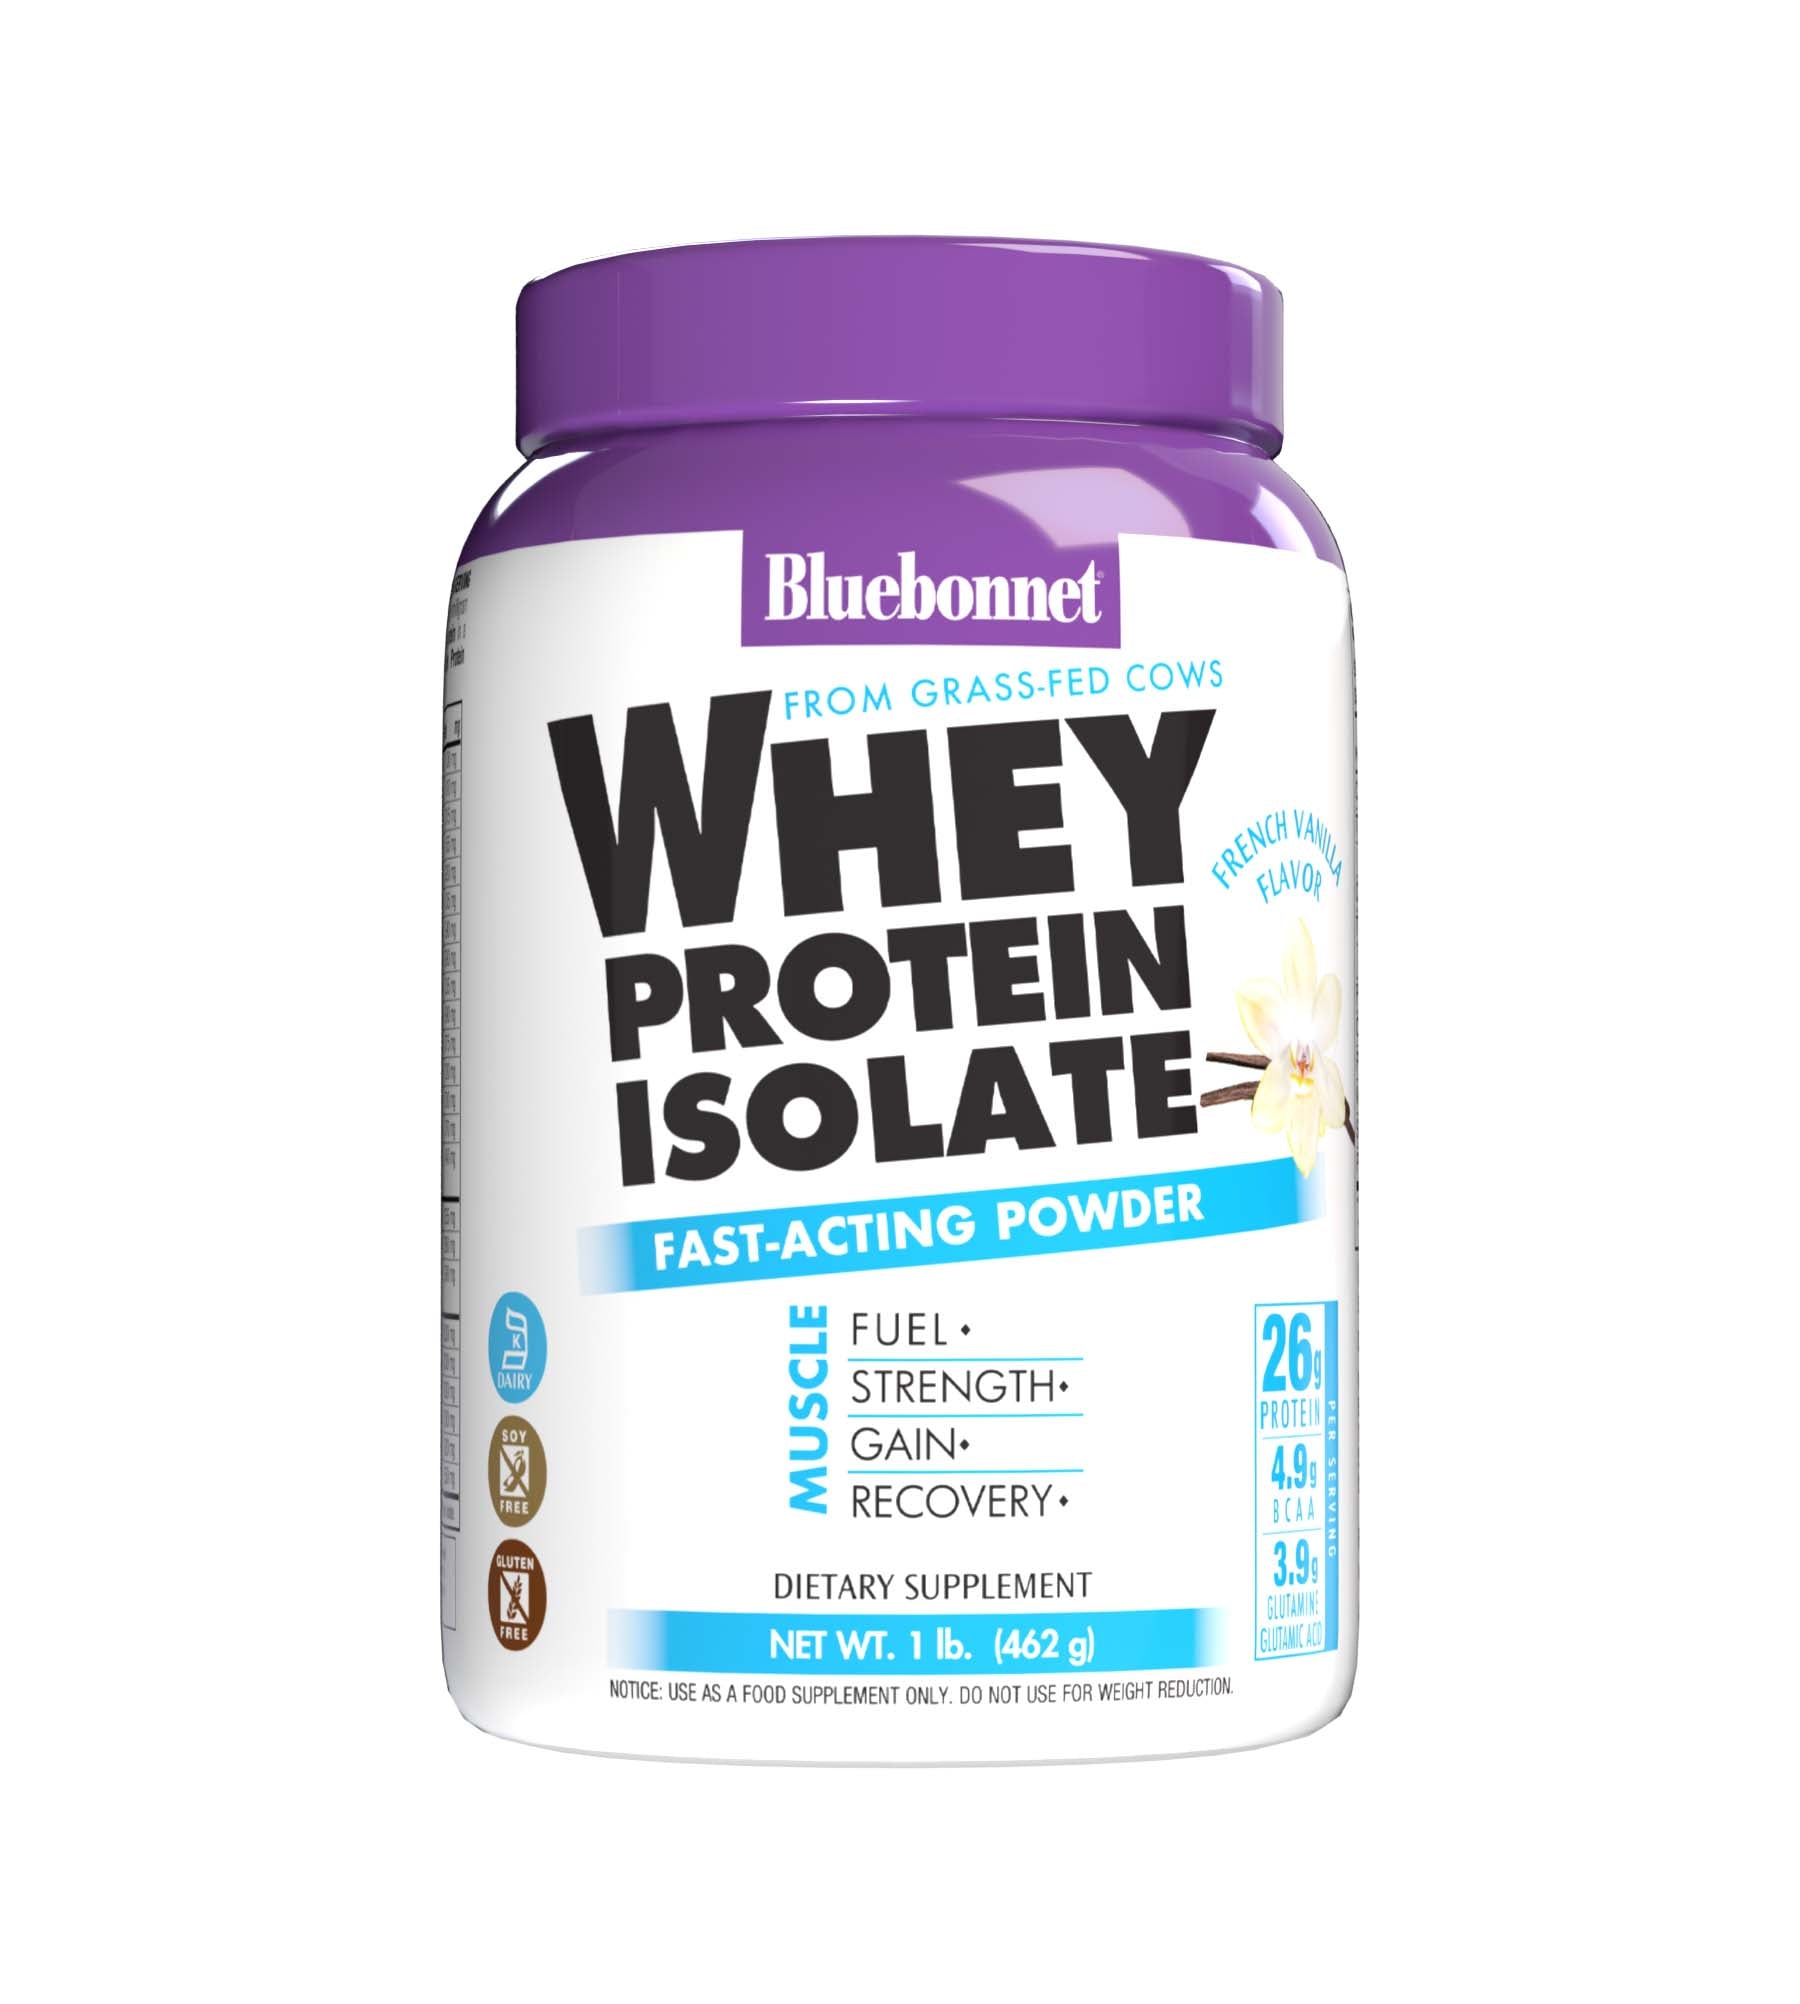 Bluebonnet's Whey Protein Isolate Powder. French vanilla flavor. 26 g of protein, 4.9 g BCAA and 3.9 g Glutamine Glutamic Acid per serving. #size_1 lb